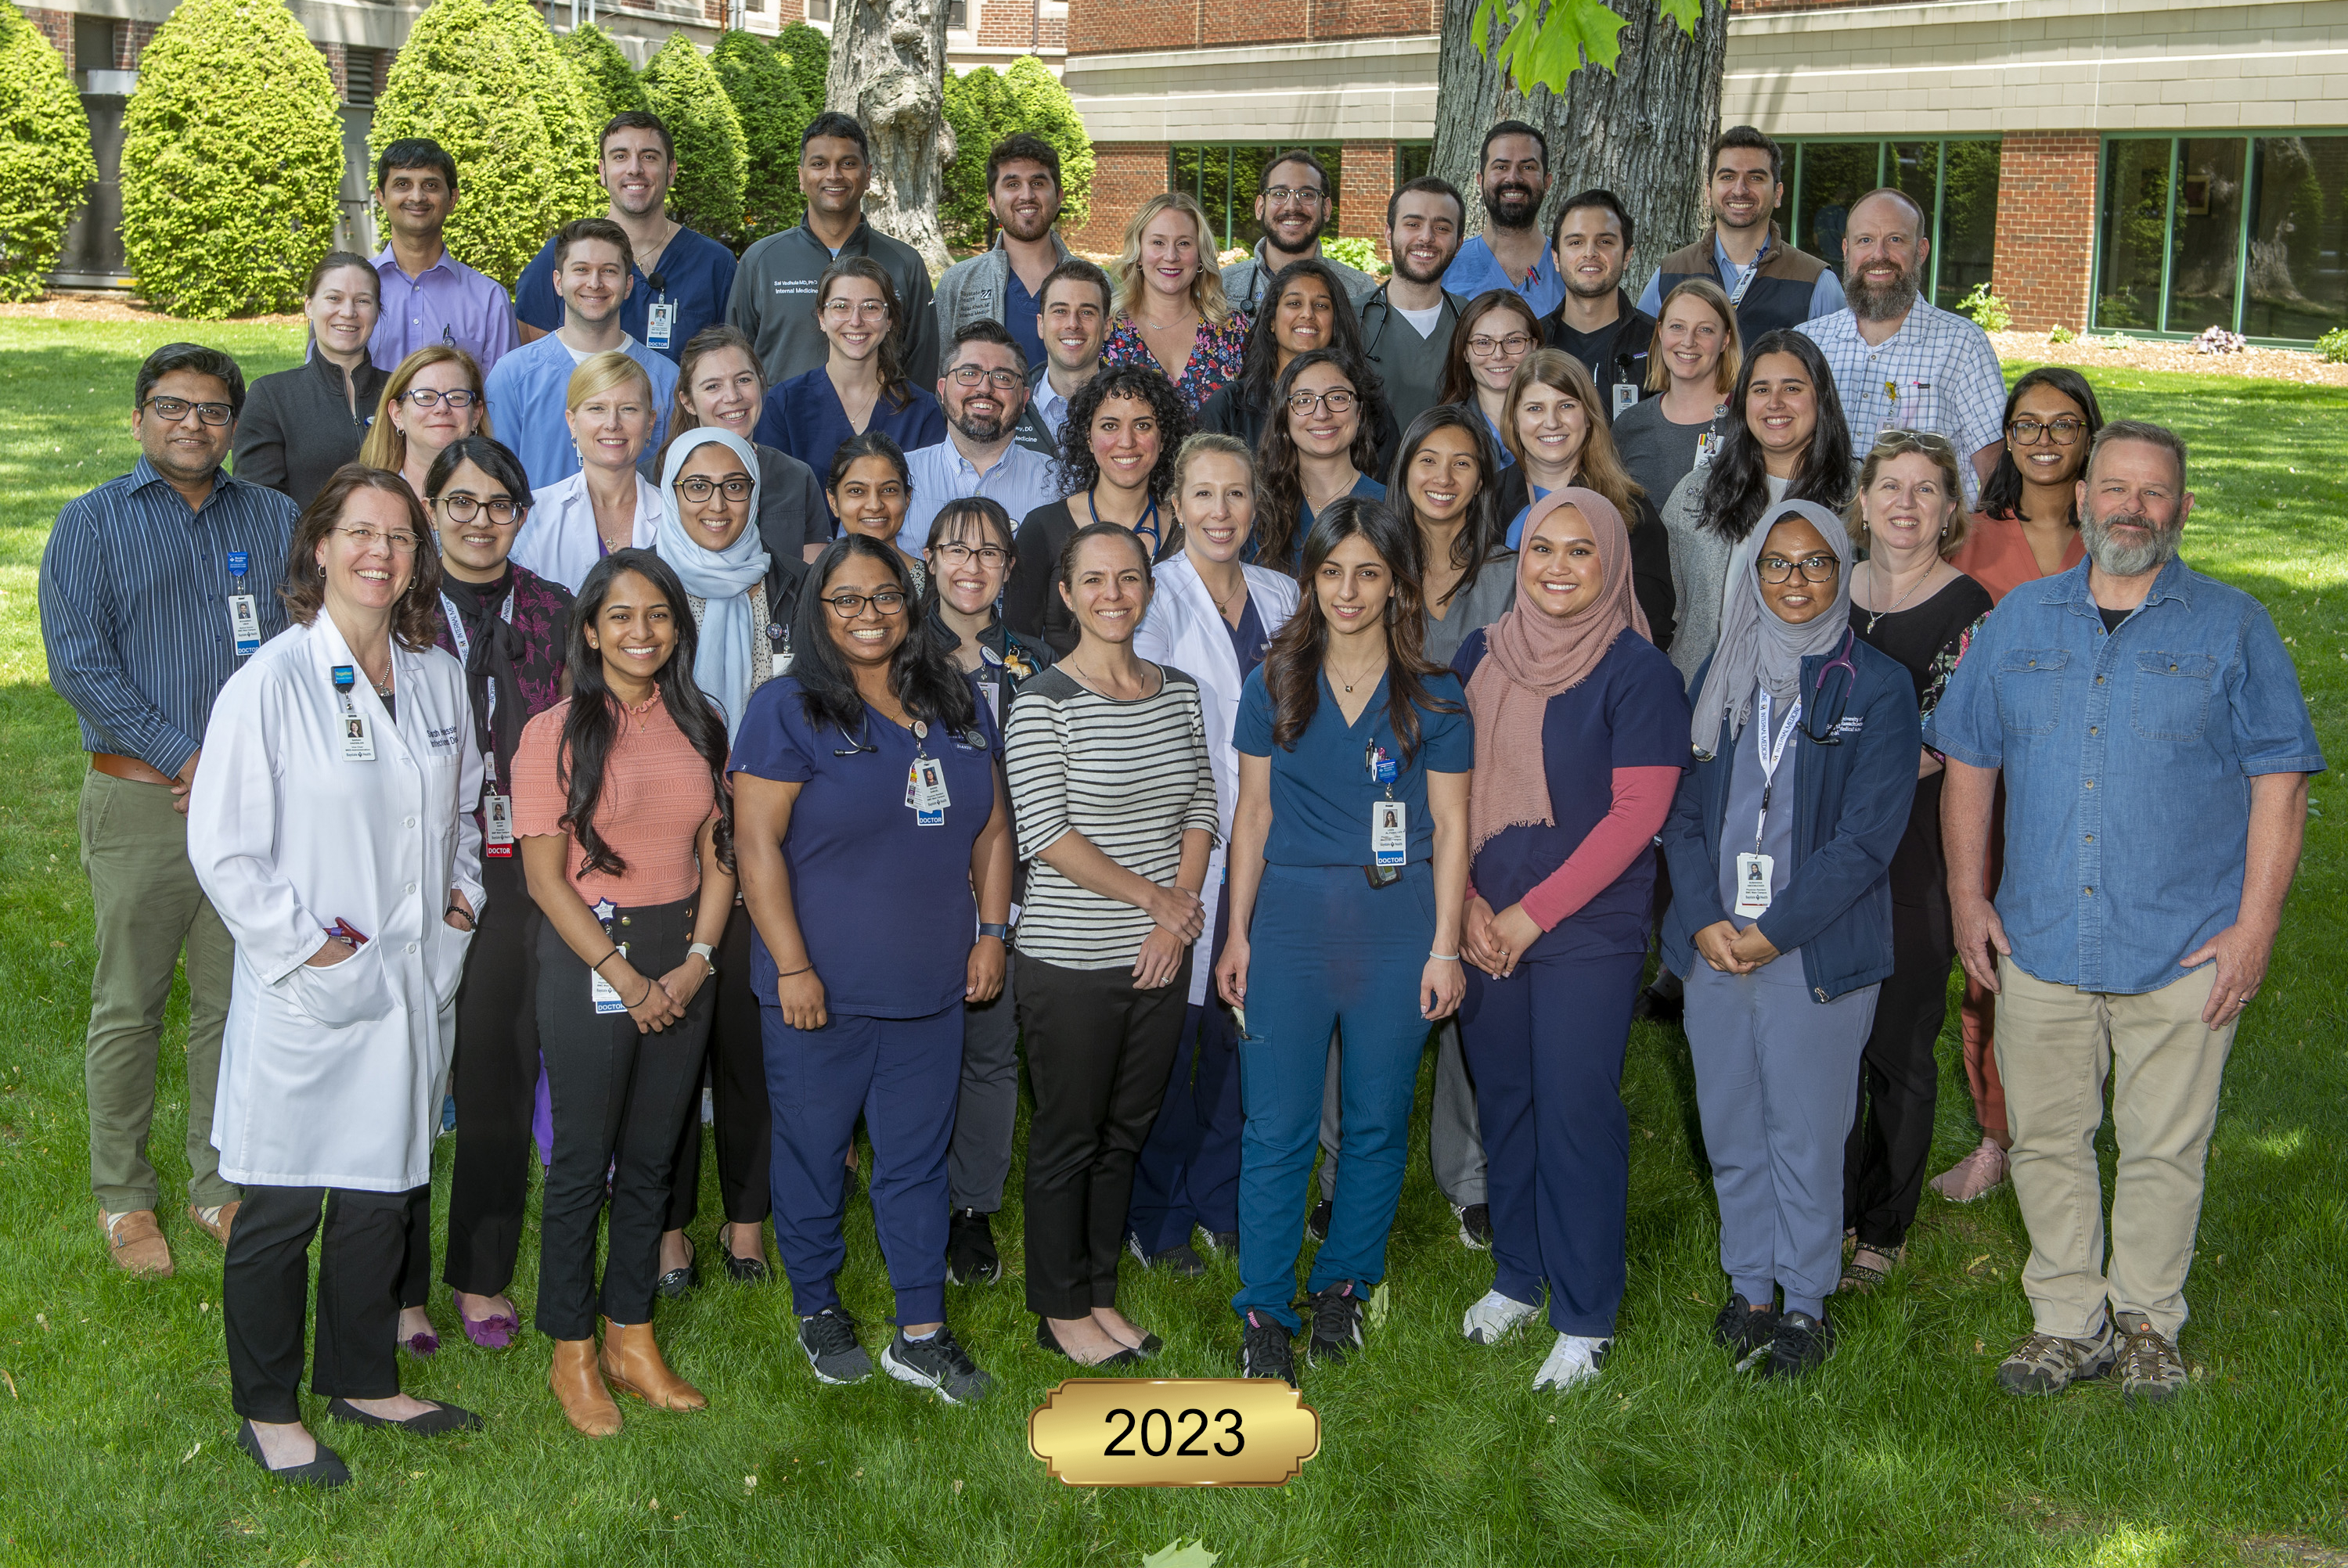 Group photo of the 2023 Internal Medicine House Staff